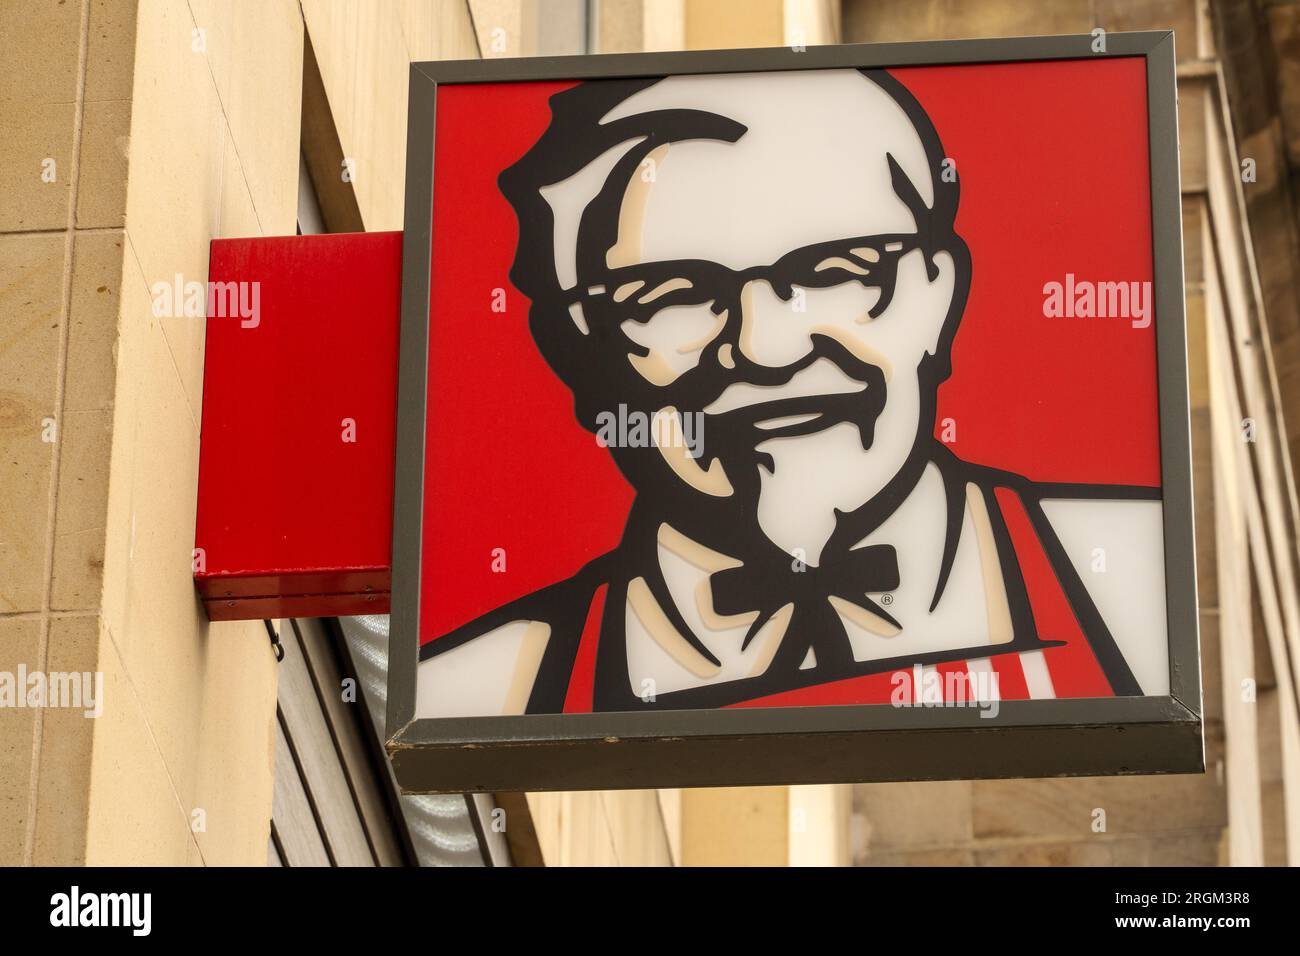 KFC or Kentucky Fried Chicken sign on the takeaway food branch in the city of Newcastle upon Tyne, UK Stock Photo